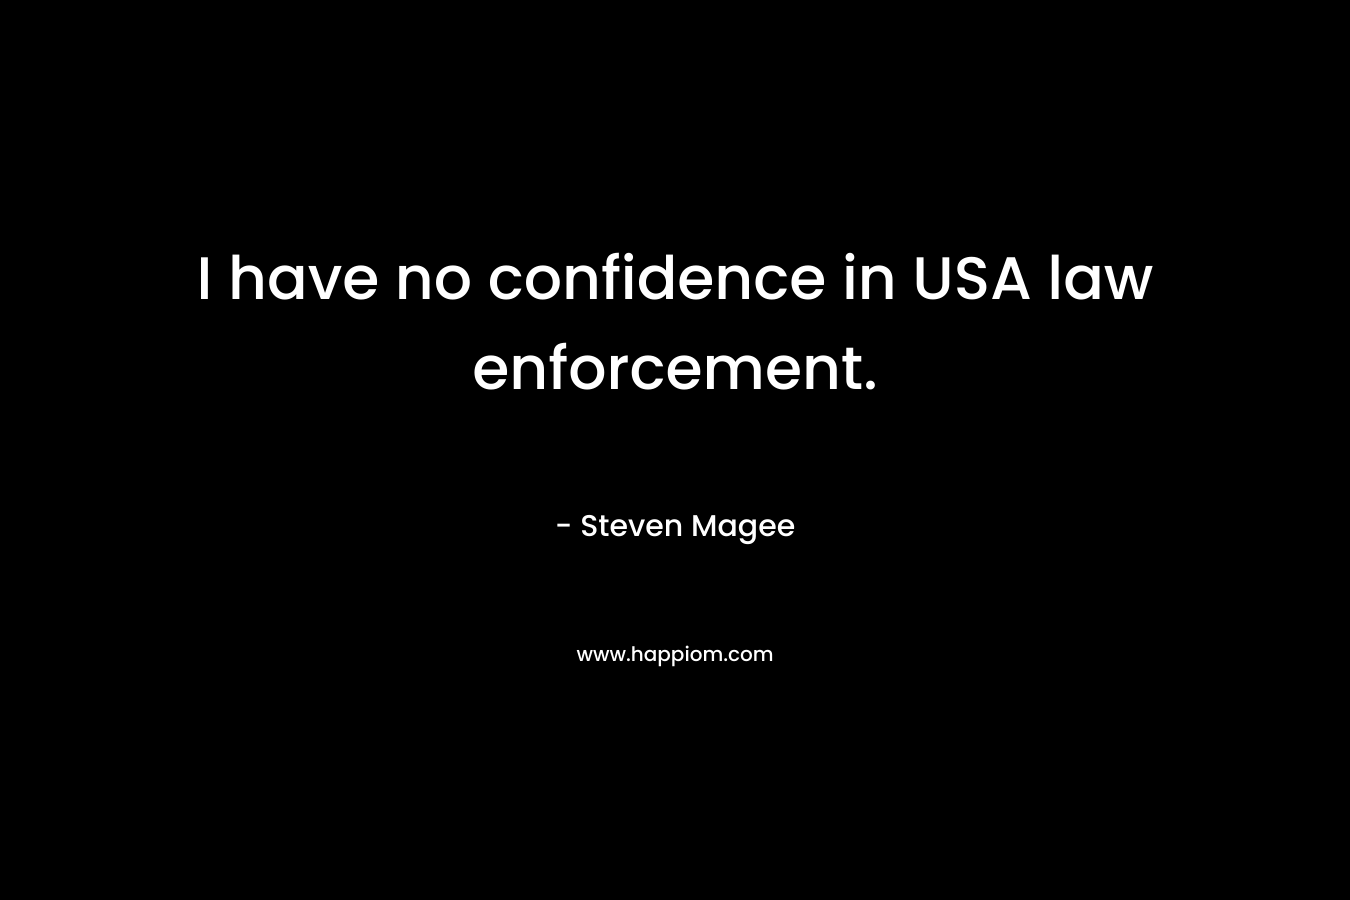 I have no confidence in USA law enforcement.